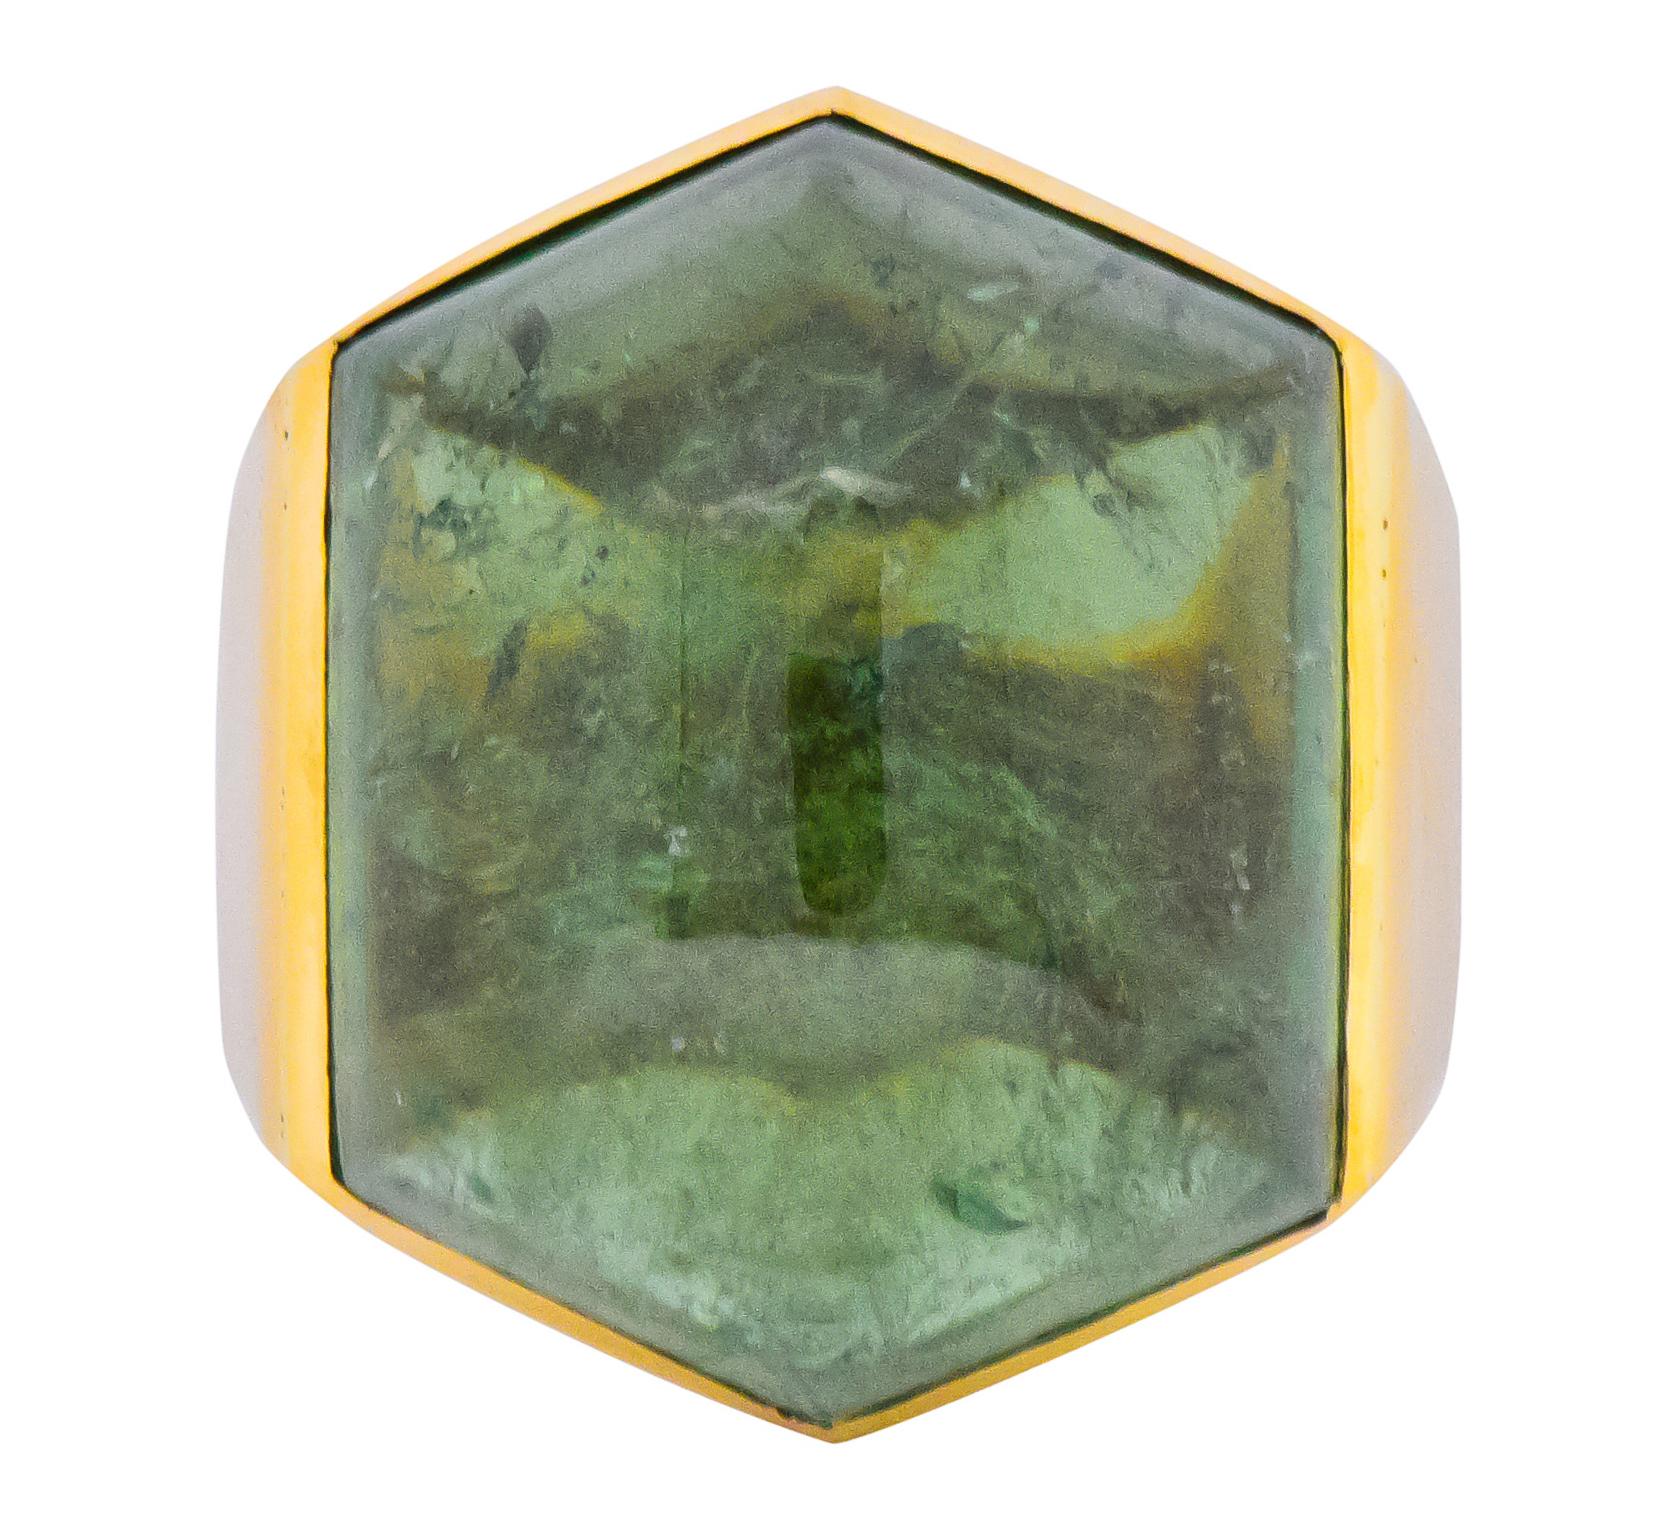 Centering a hexagonal cabochon tourmaline measuring approximately 1 1/4 x 1 1/8 inch, transparent medium-light forest green color

Bezel set into high polished 18 karat gold mount and shank

Stamped 750 for 18 karat gold with British hallmarks and